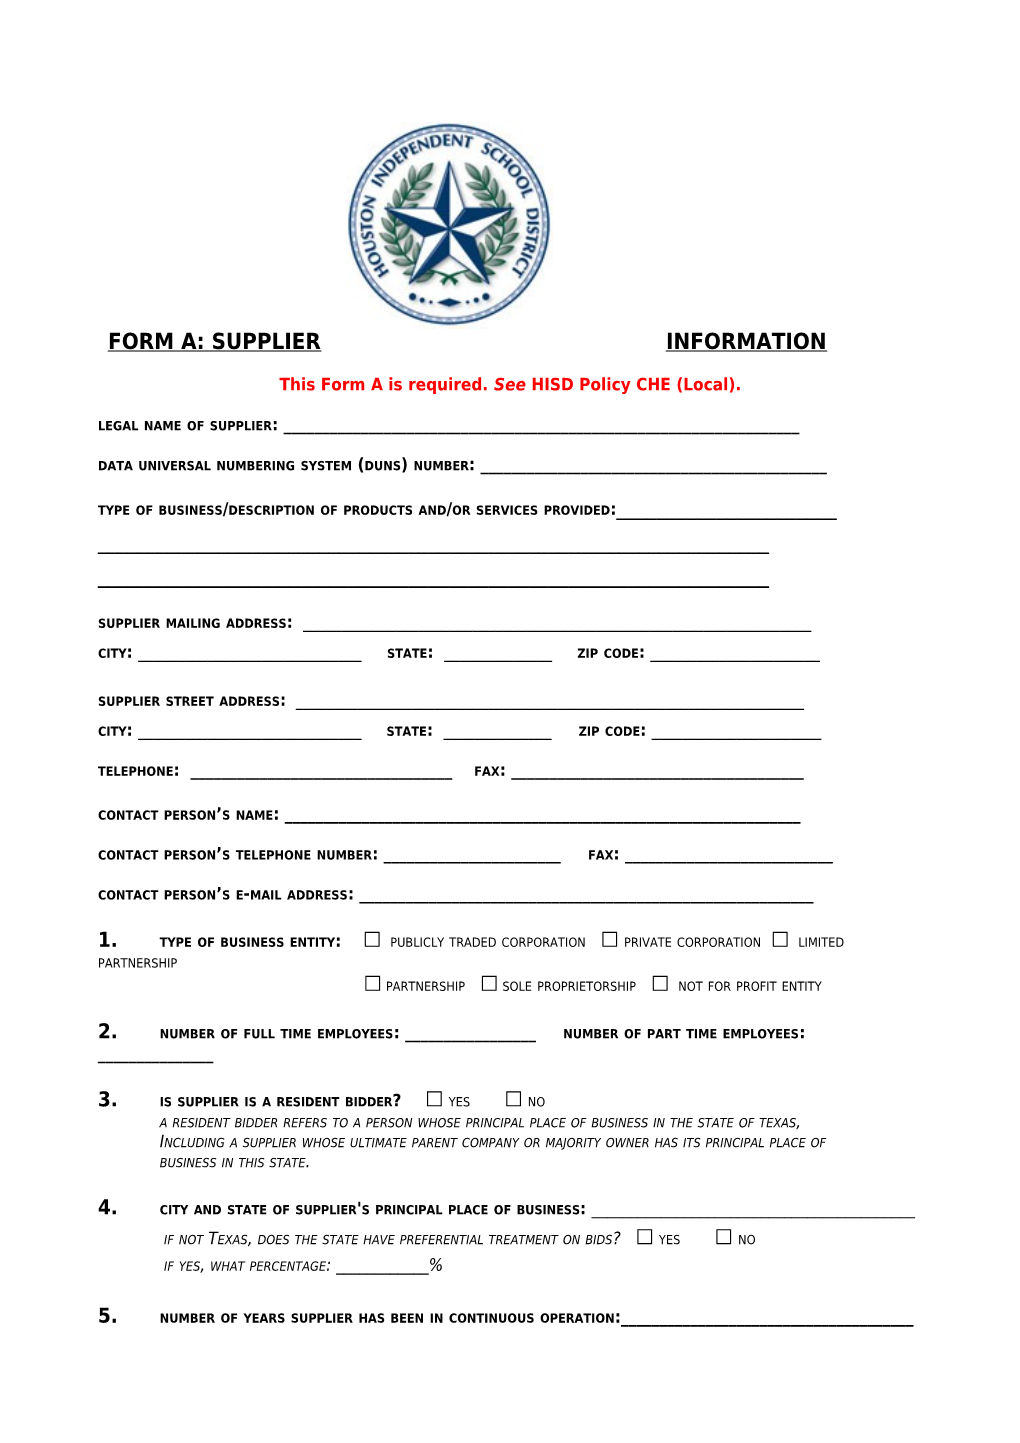 This Form a Is Required. See HISD Policy CHE (Local)